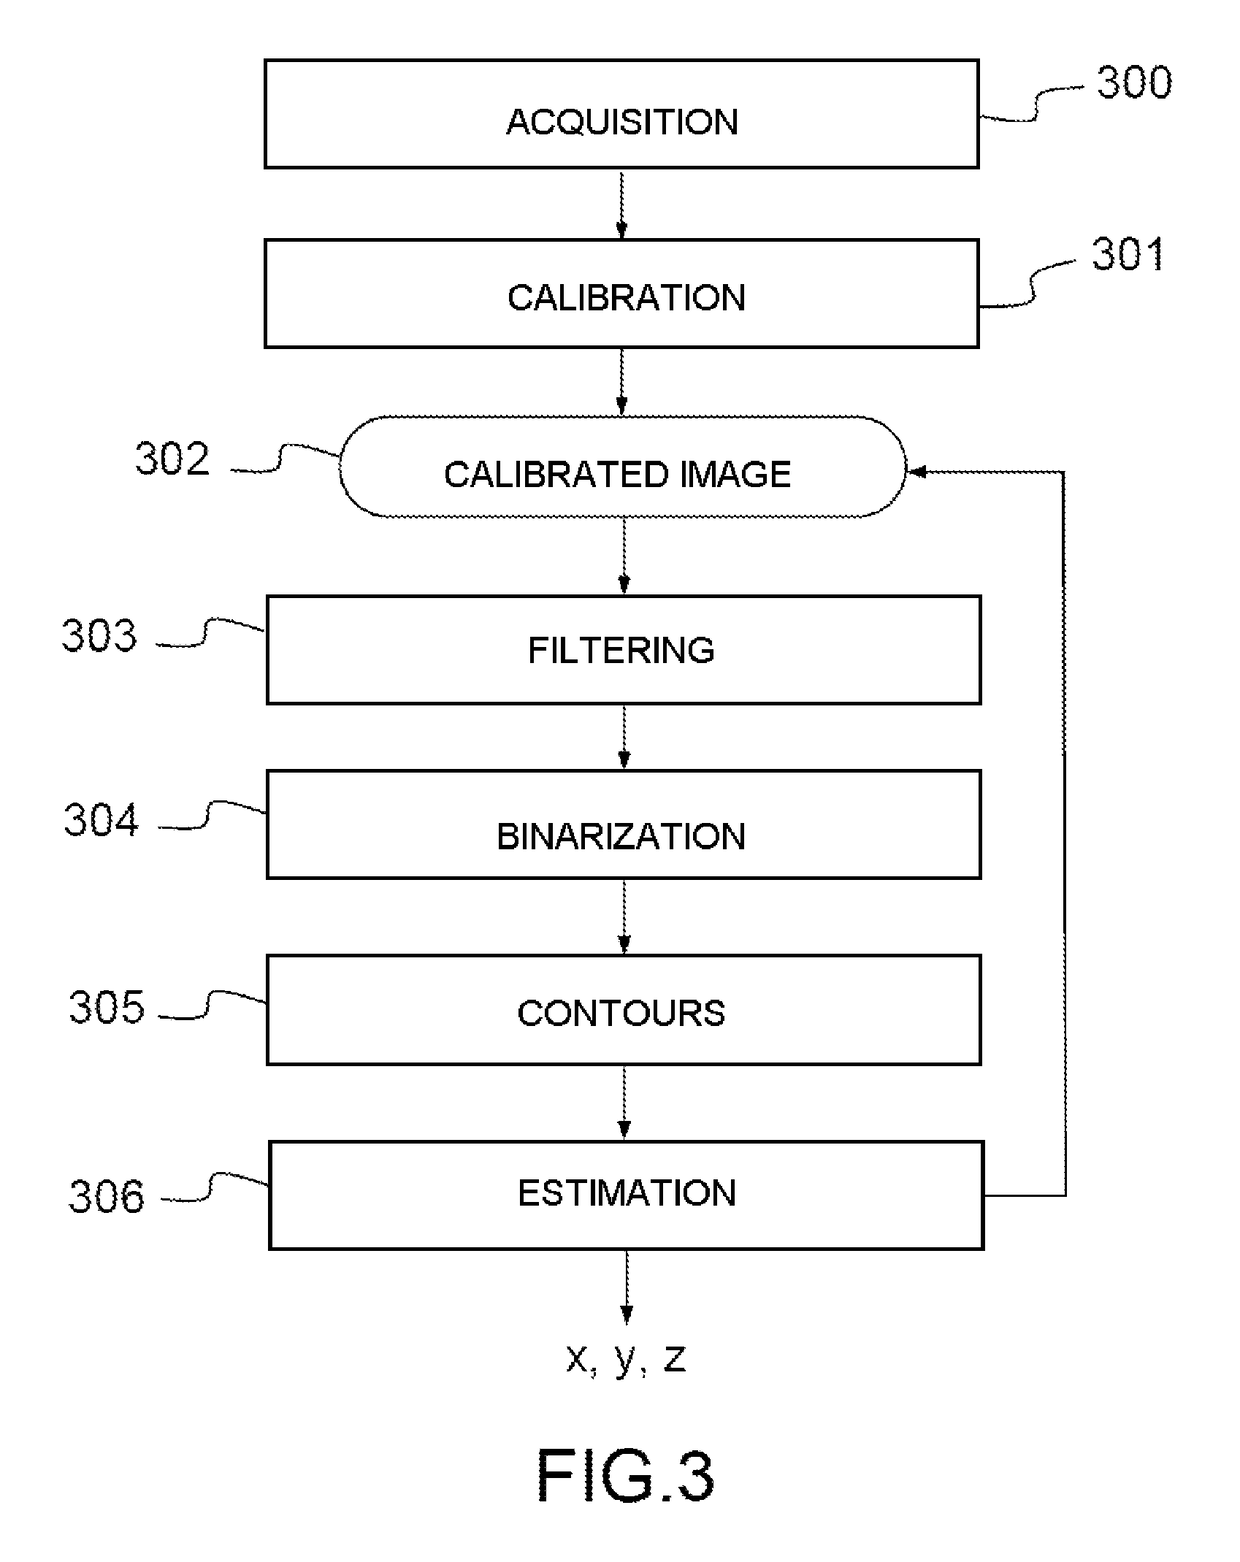 Haptic system for establishing a contact free interaction between at least one part of a user's body and a virtual environment